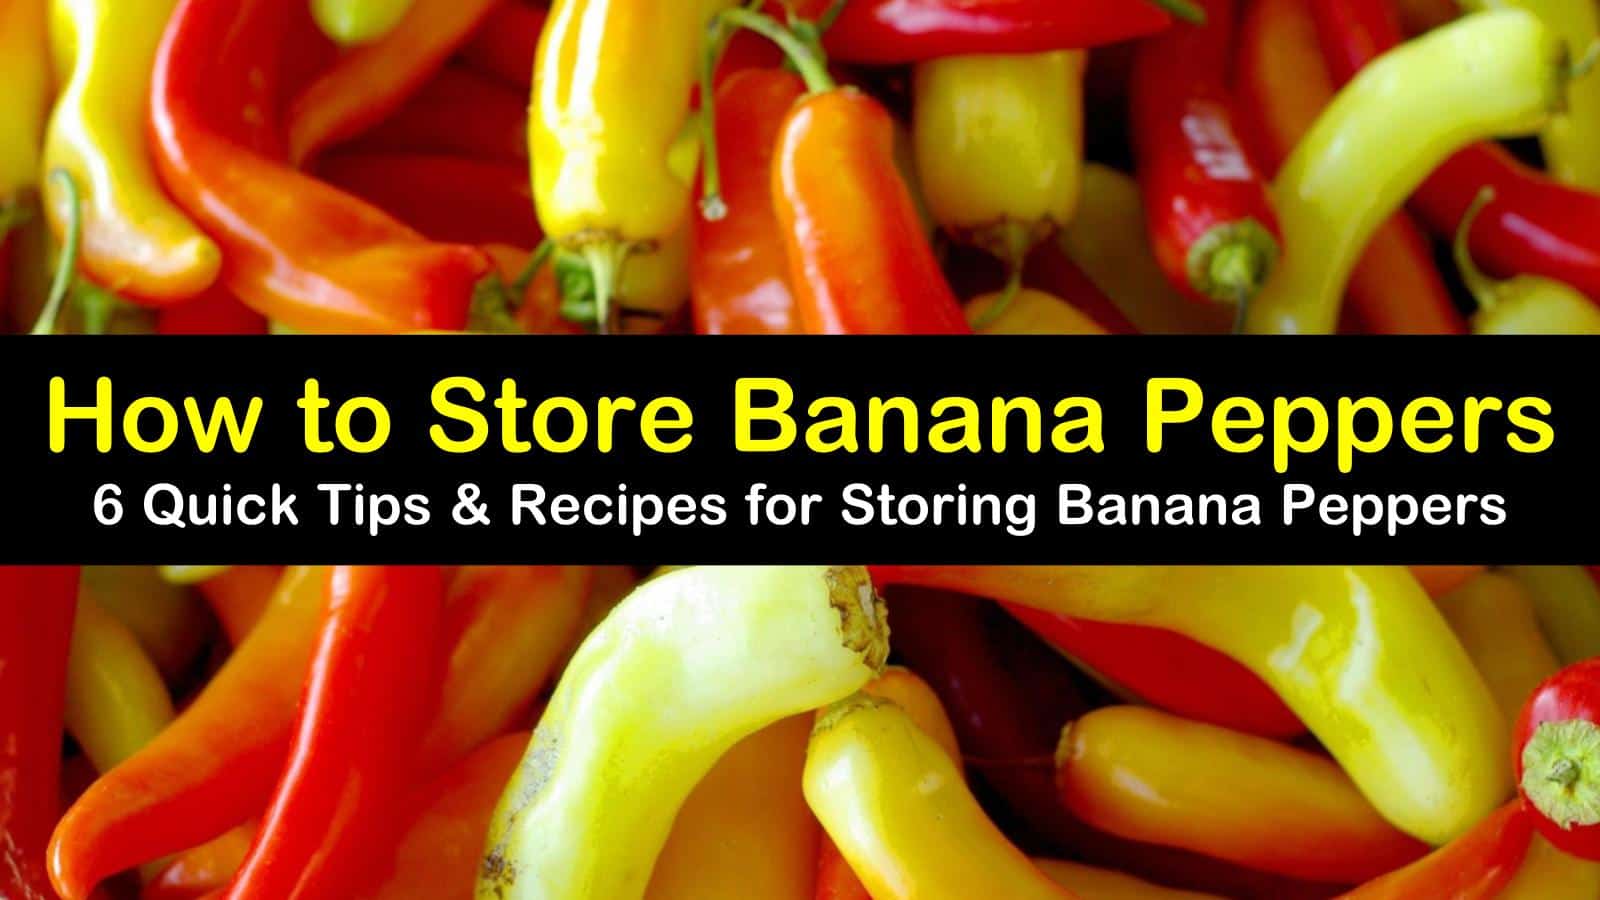 how to store banana peppers titleimg1